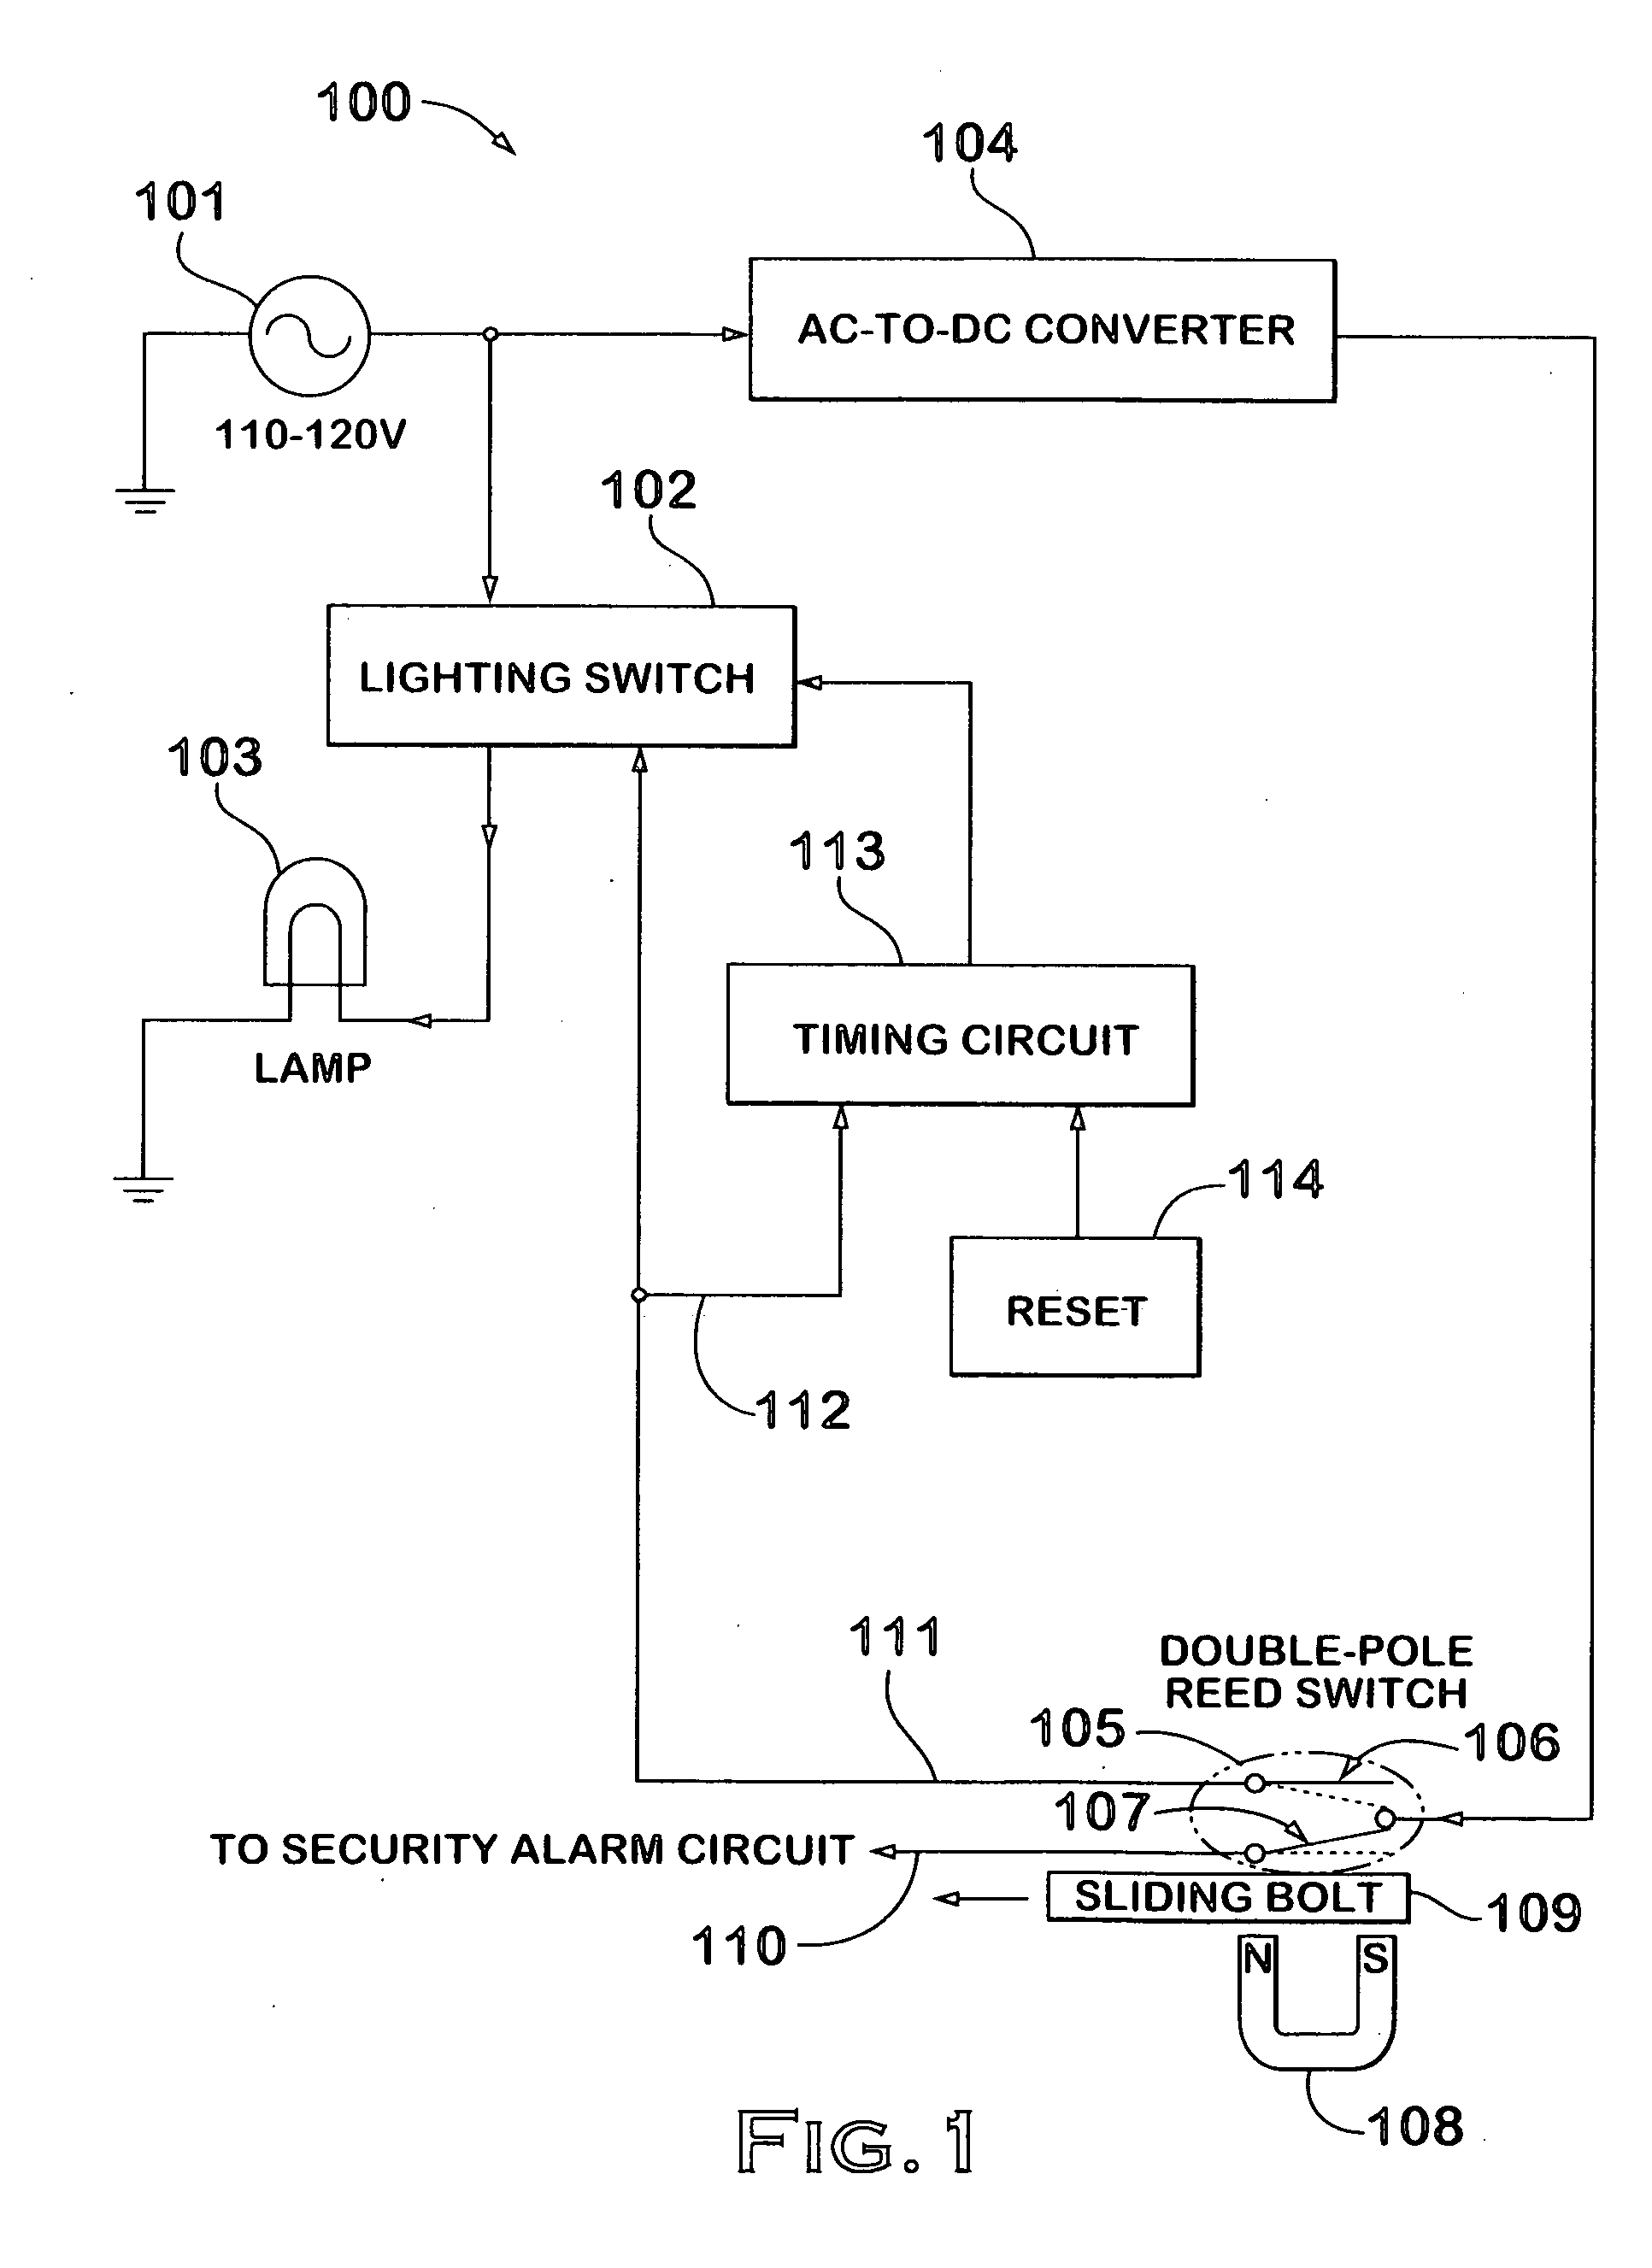 Door bolt position detection system with light switching capability and a backup timer